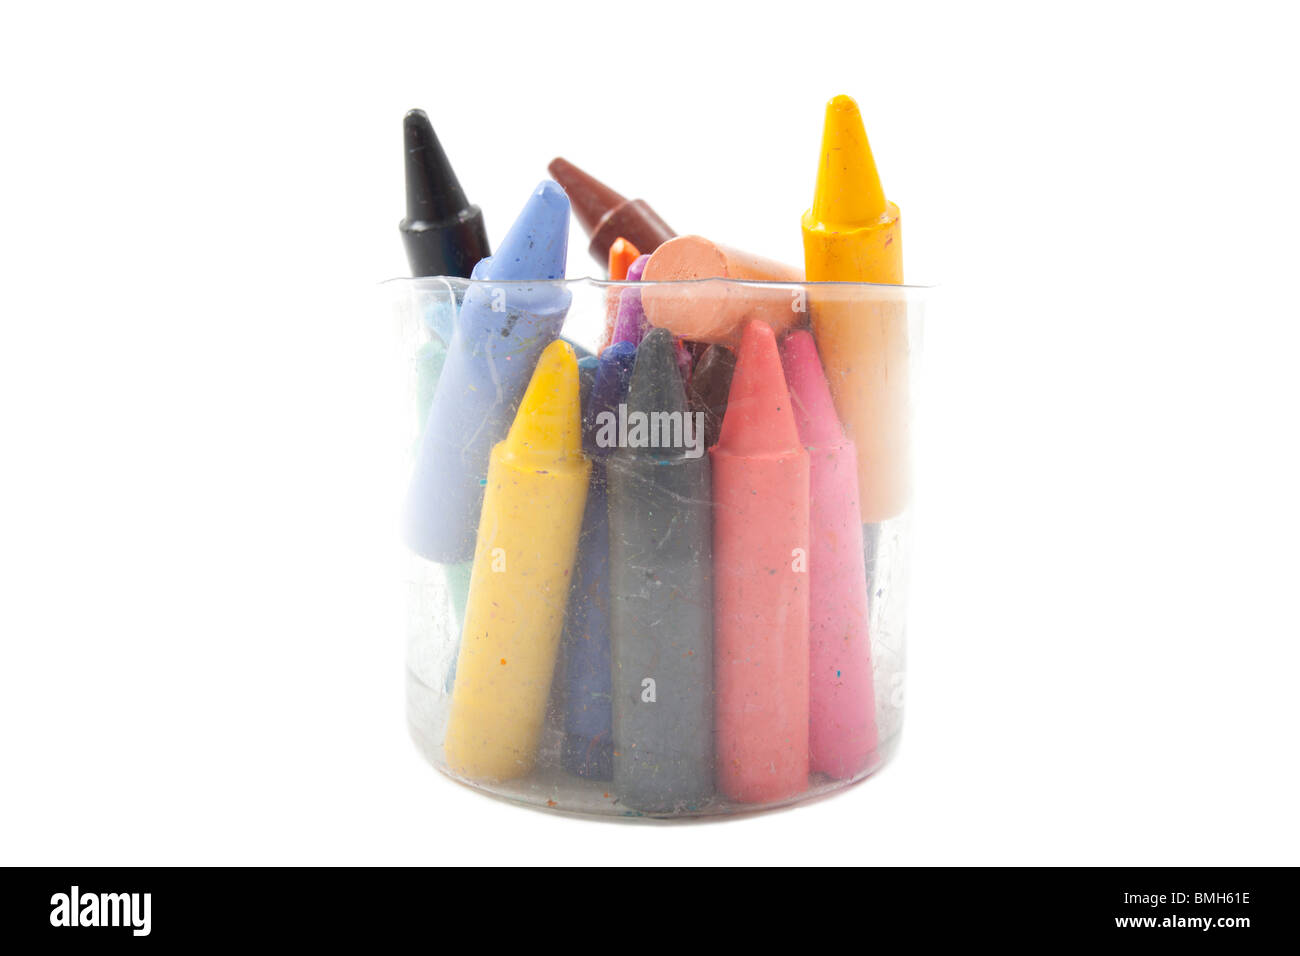 wax crayons in clear plastic pot on white background Stock Photo